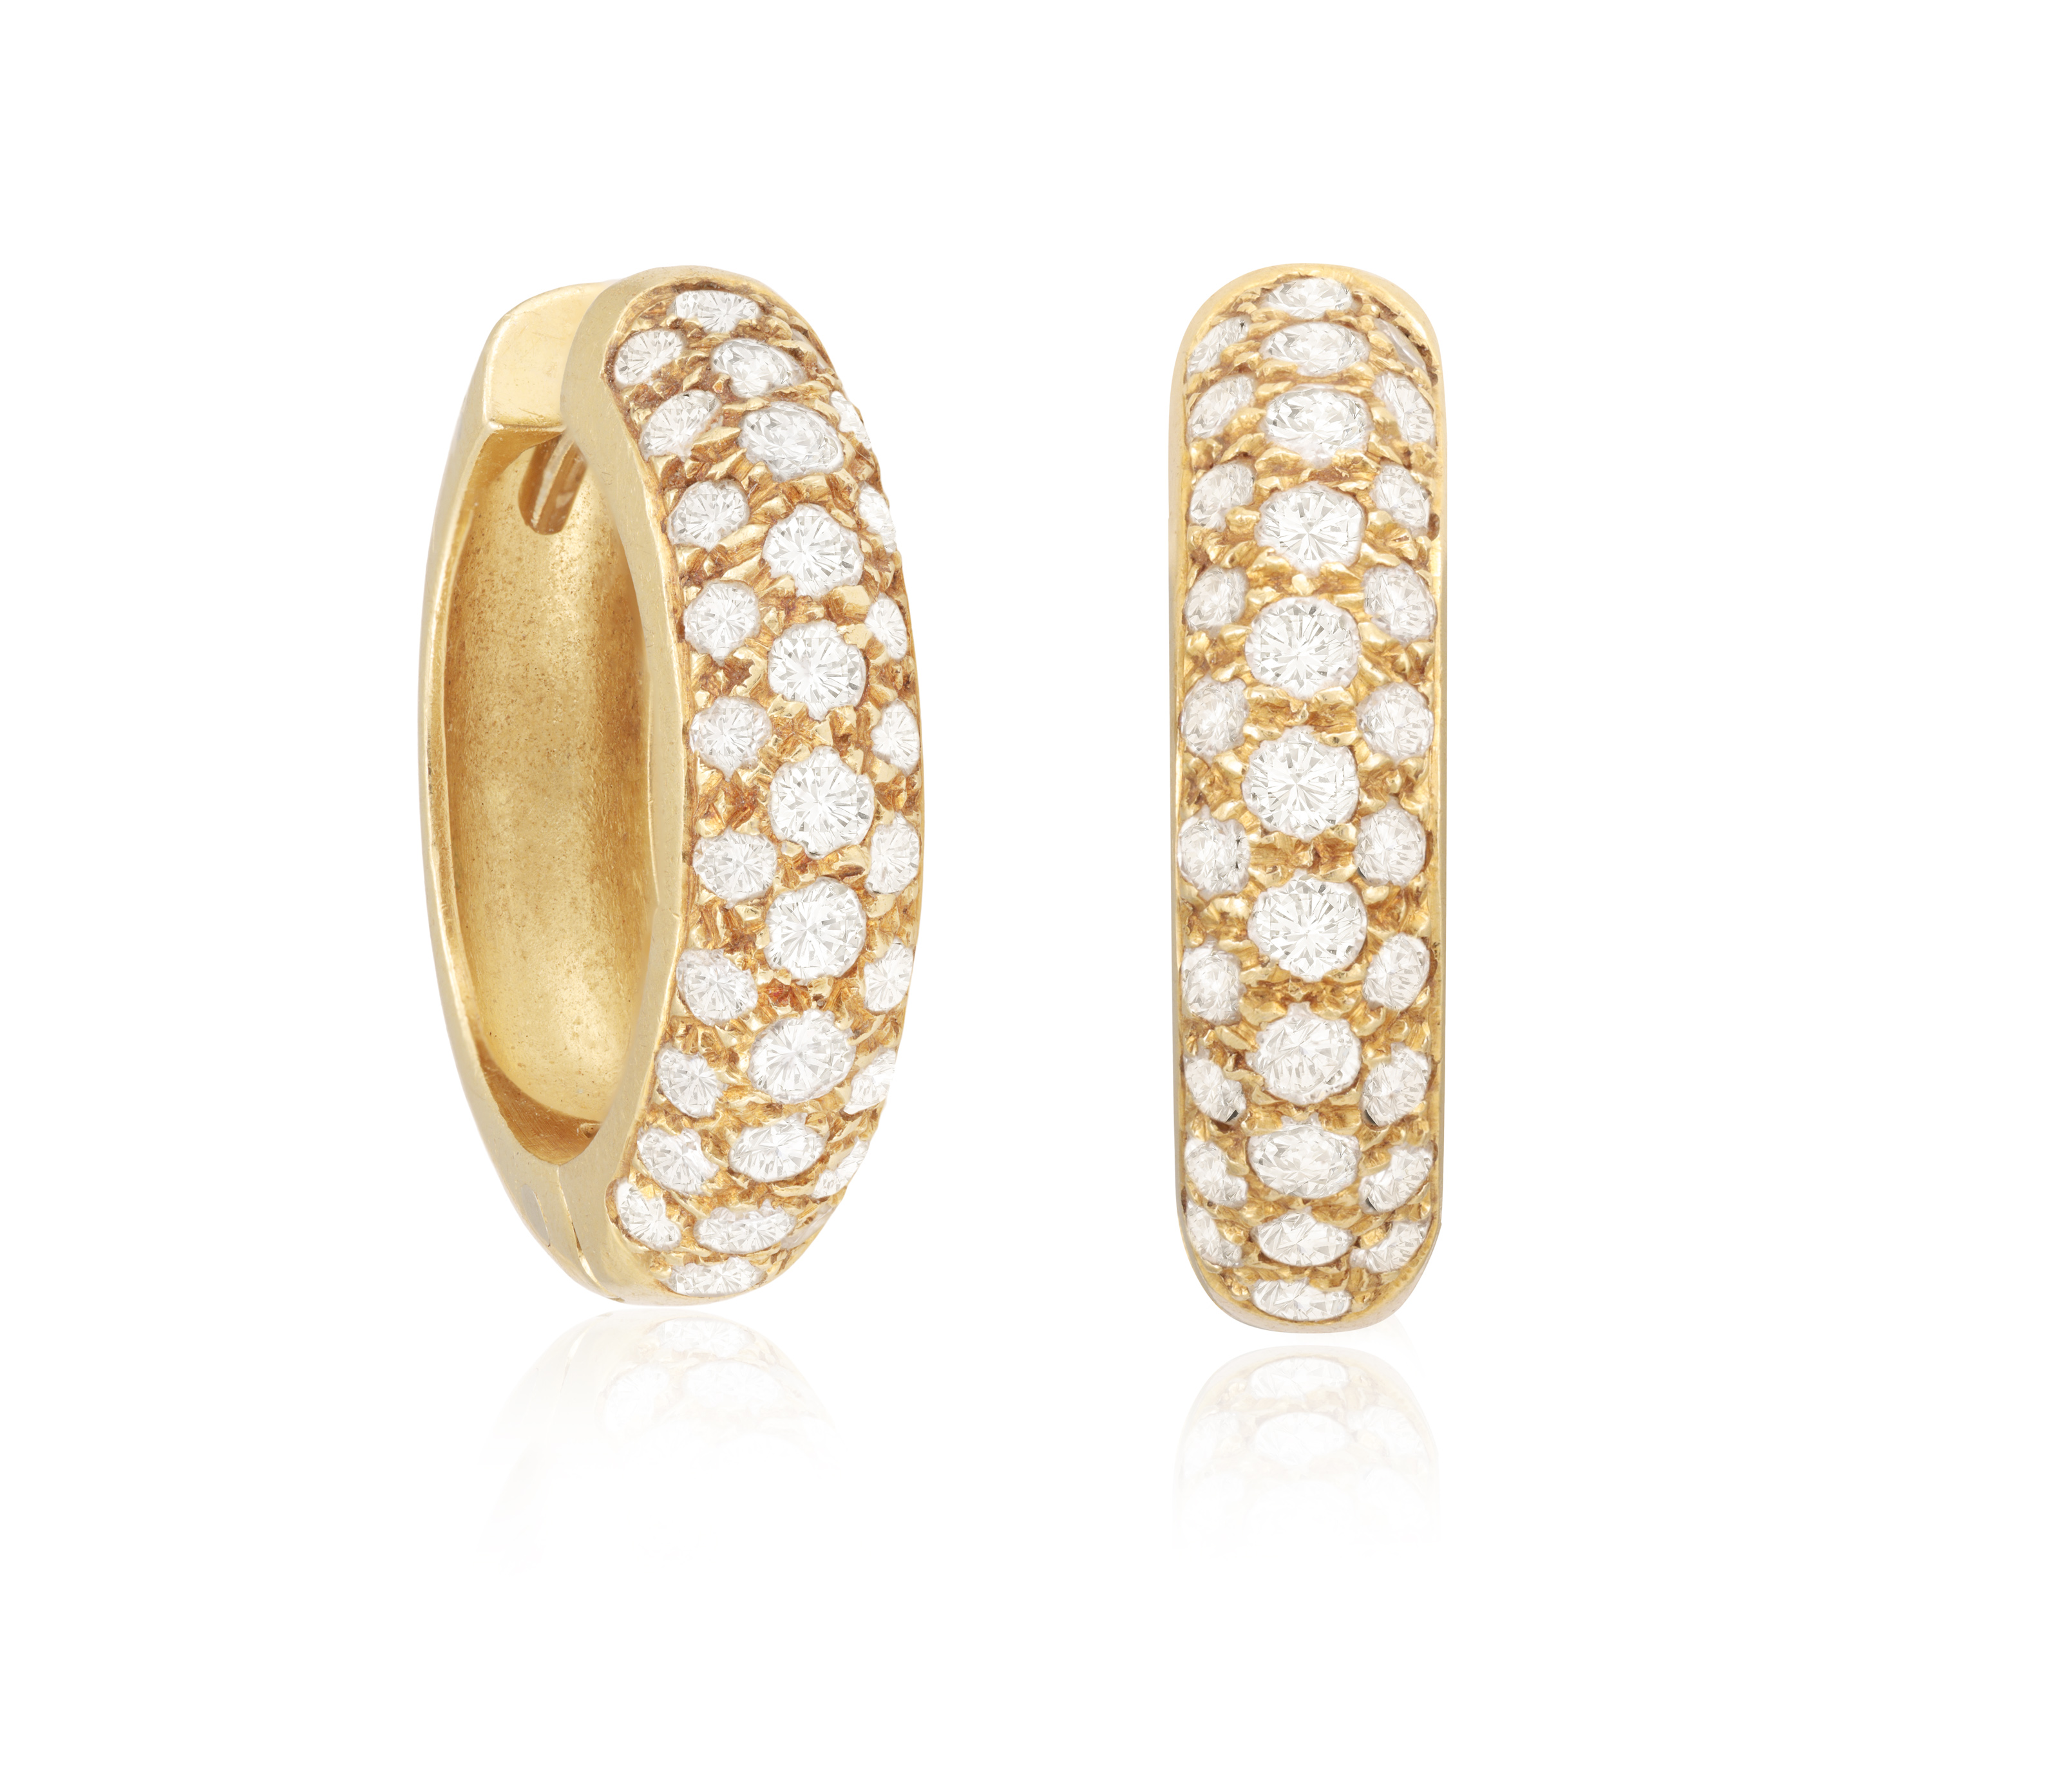 A PAIR OF DIAMOND HOOP EARRINGS Each frontispiece pavé-set with brilliant-cut diamonds, mounted in